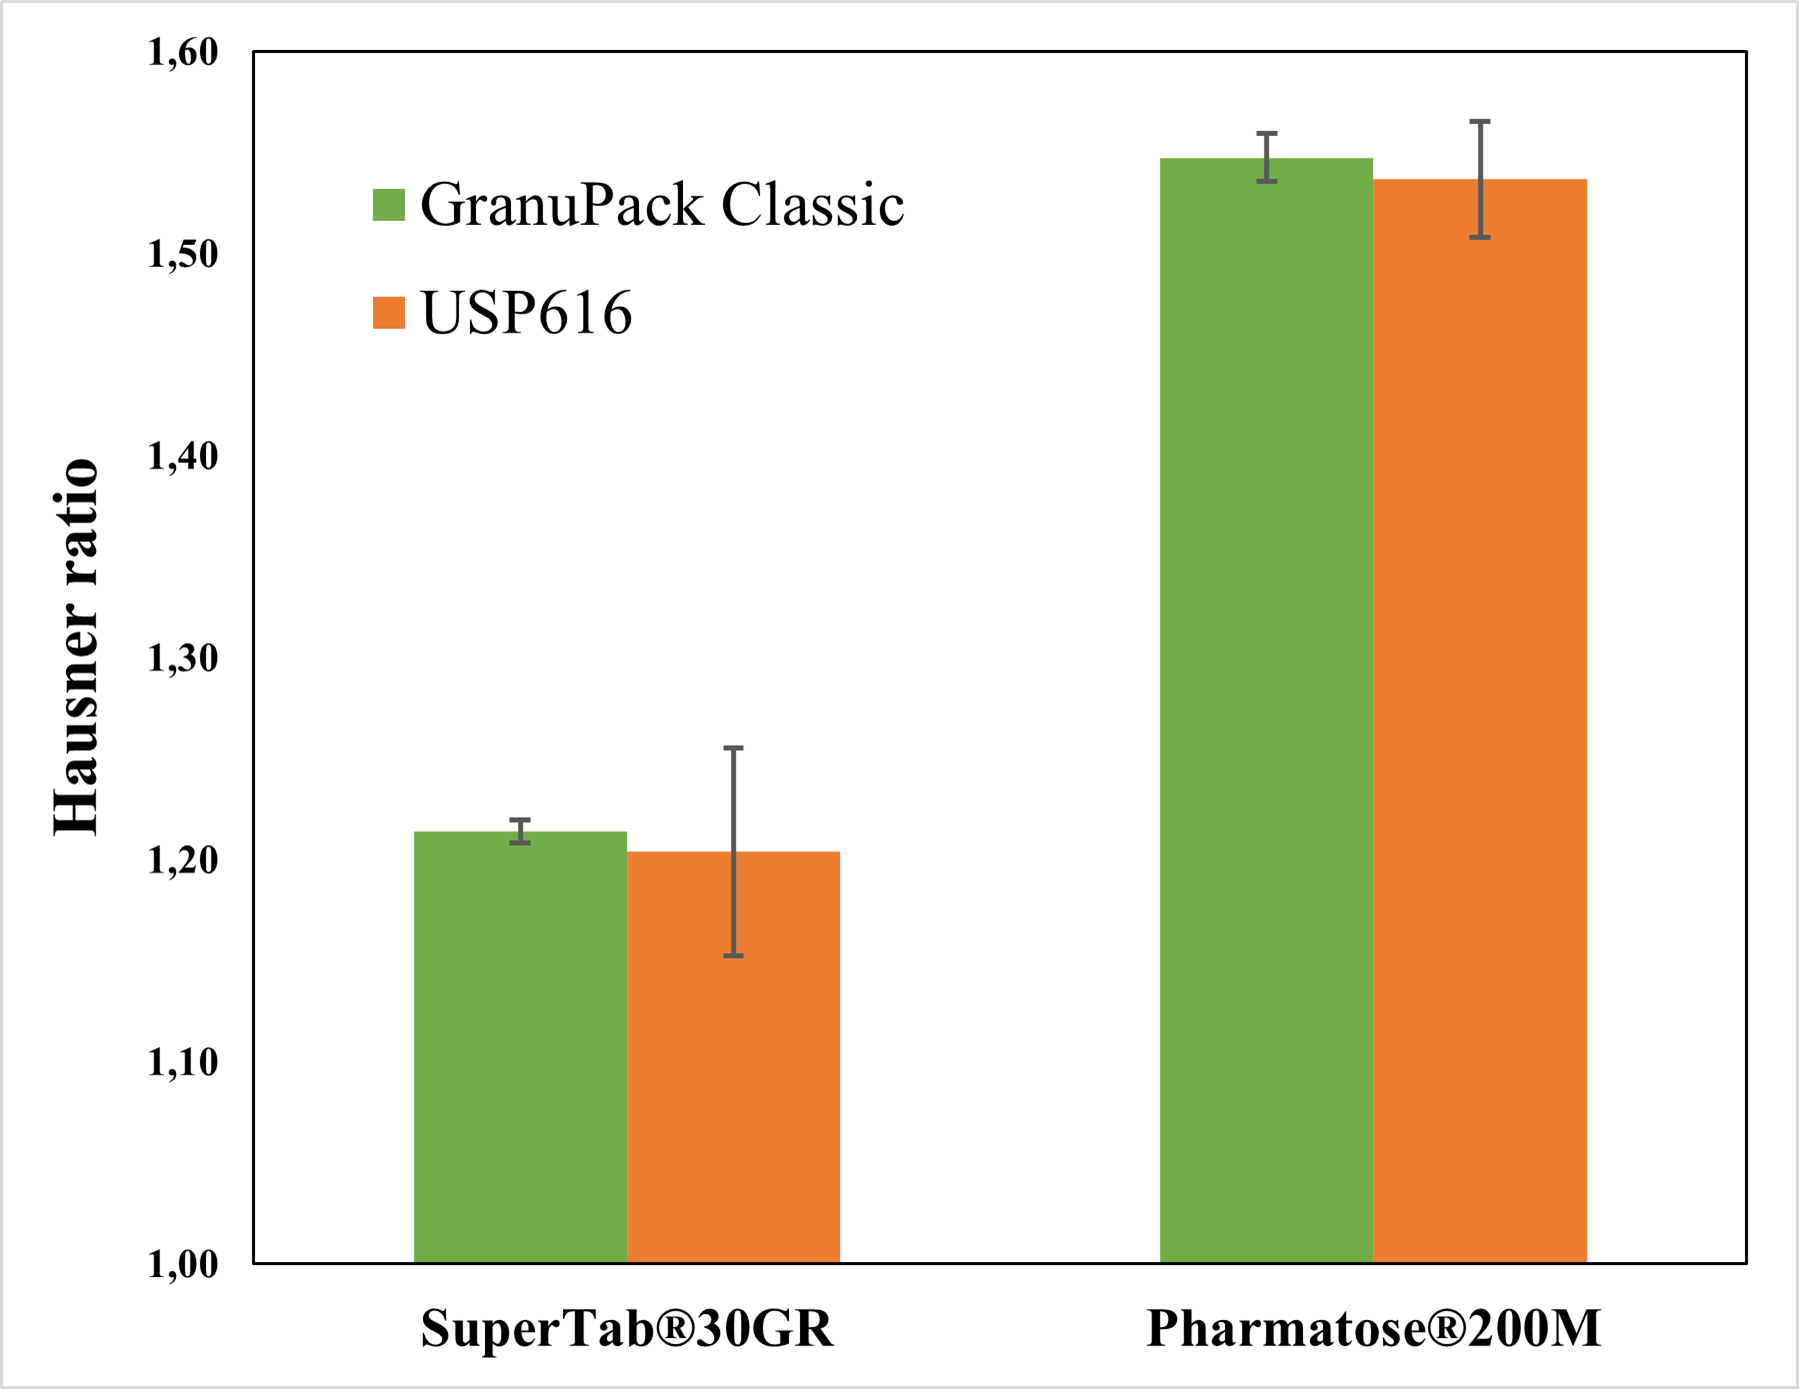 Hausner ratio measured with the GranuPack Classic and the USP616 procedure for both powders